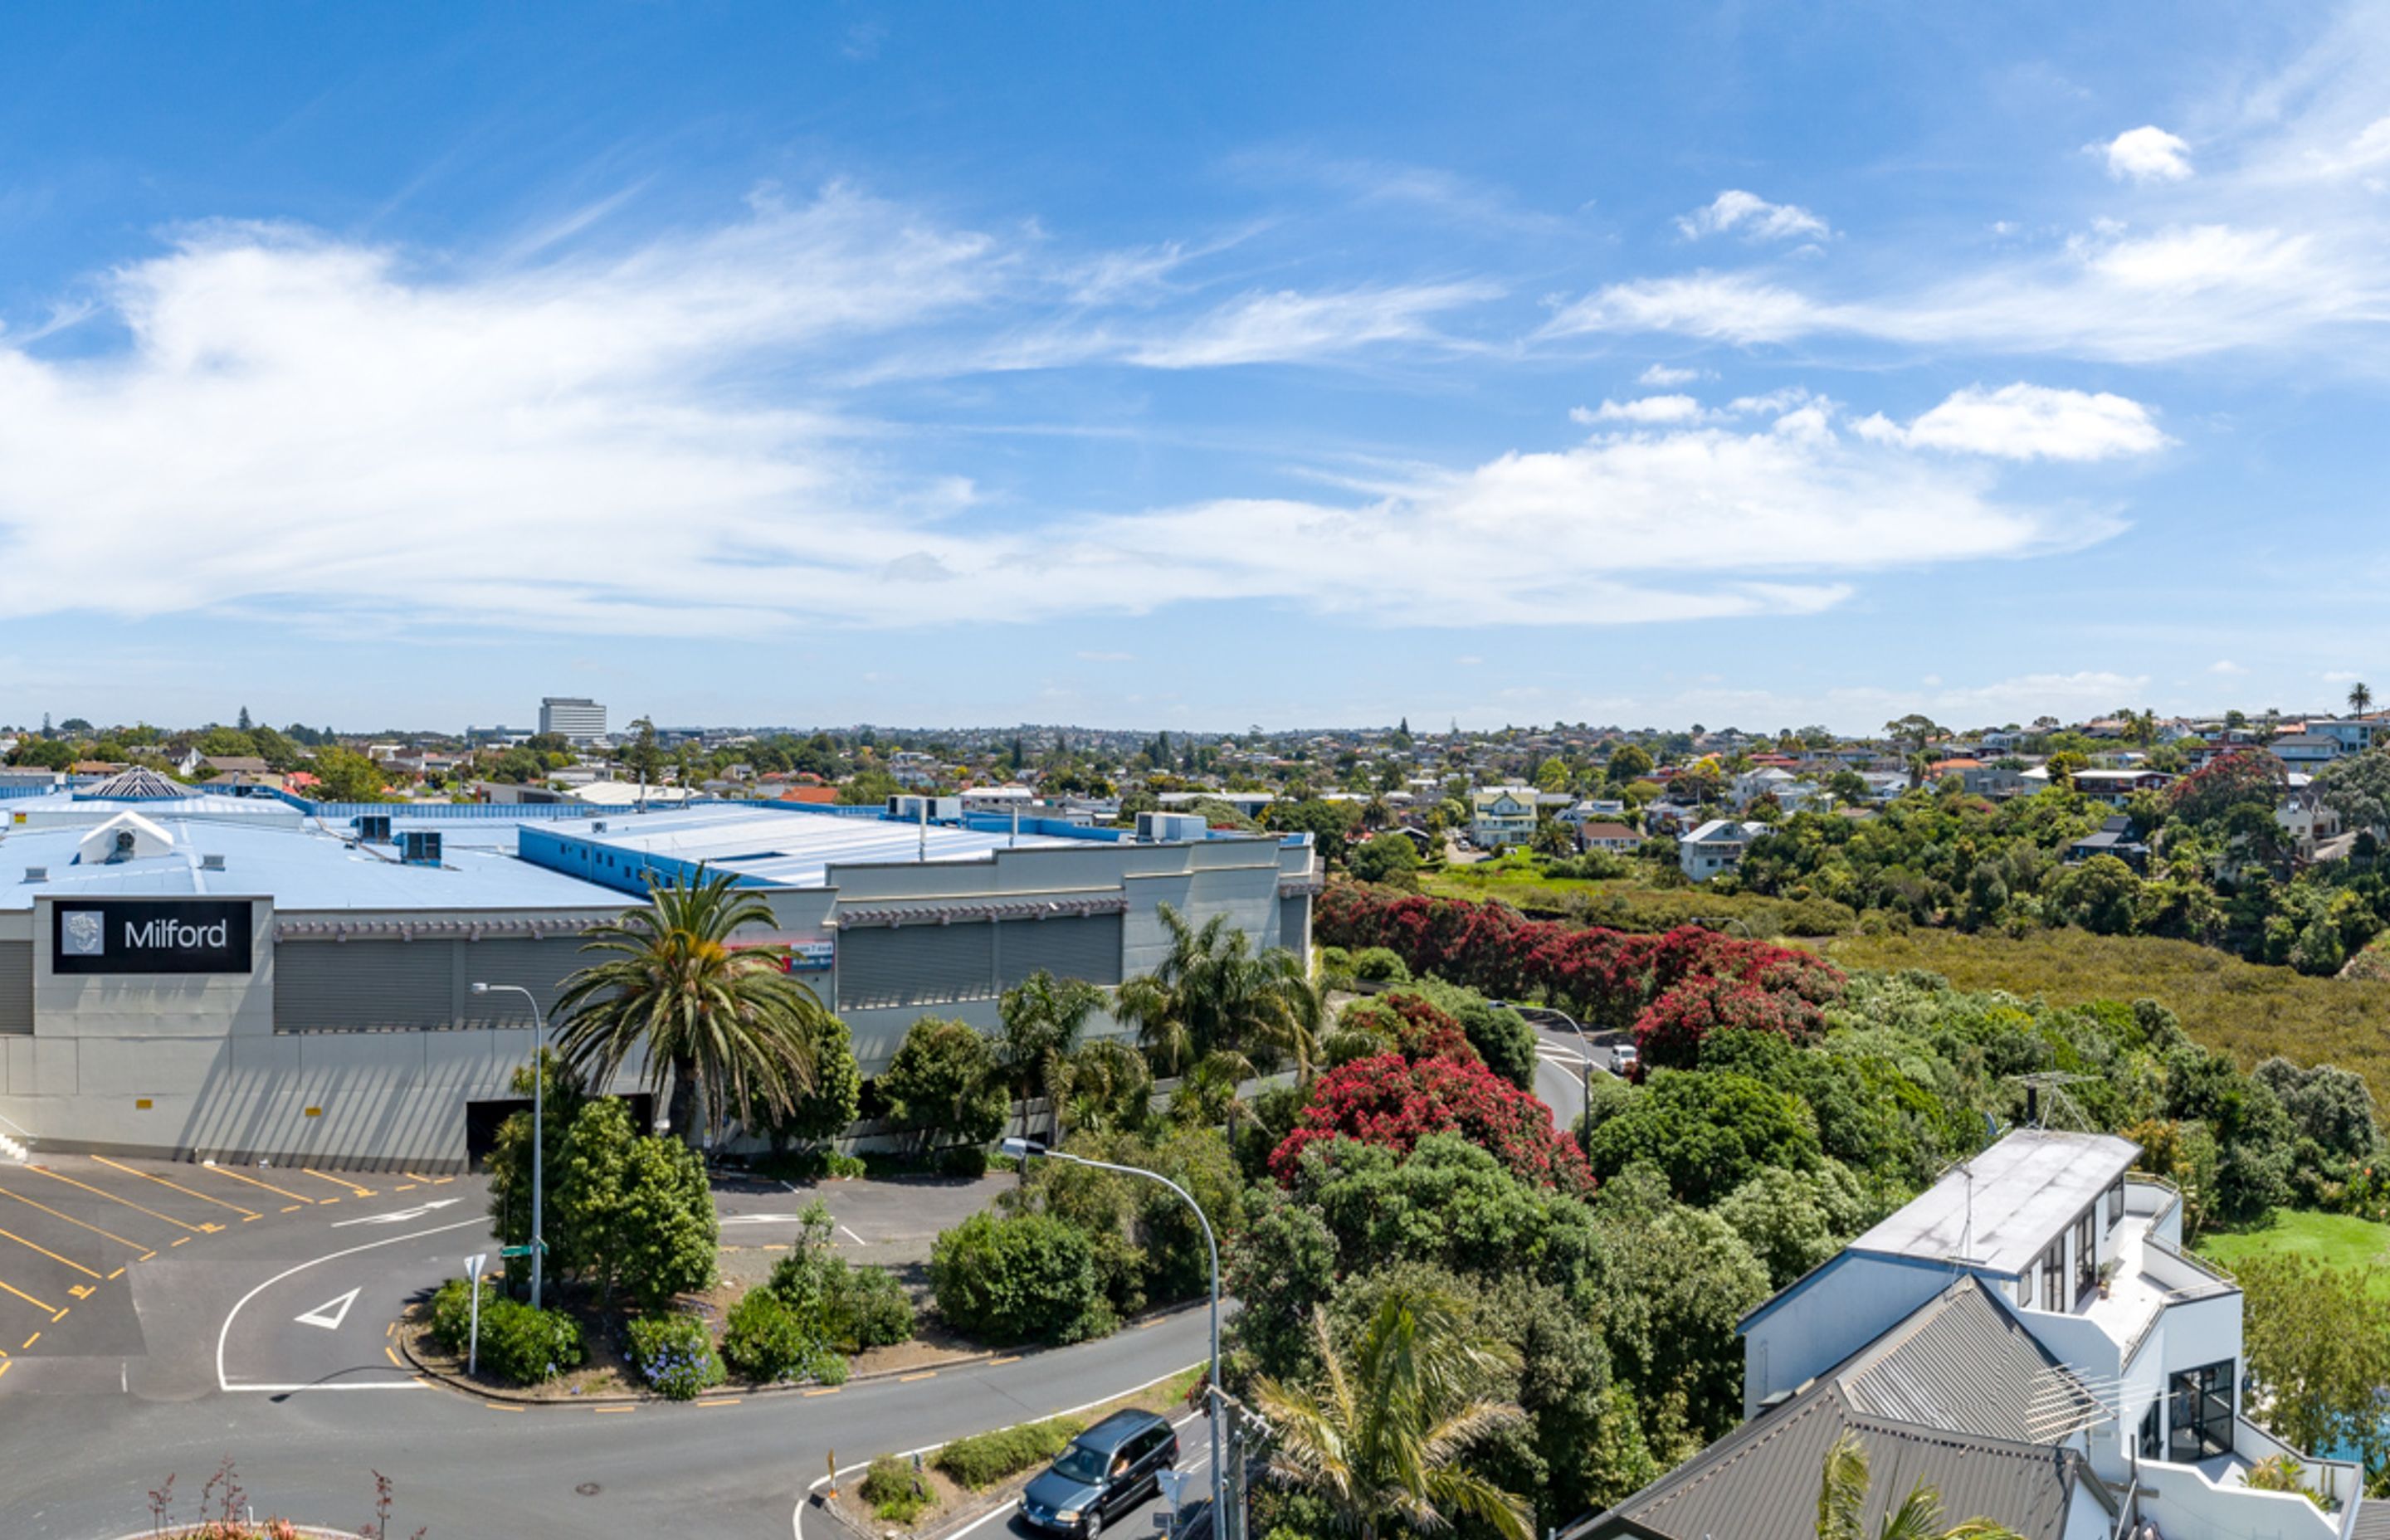 Construction Photography NZ - CPNZ - NZRPG - Drone View Checking Photo 3